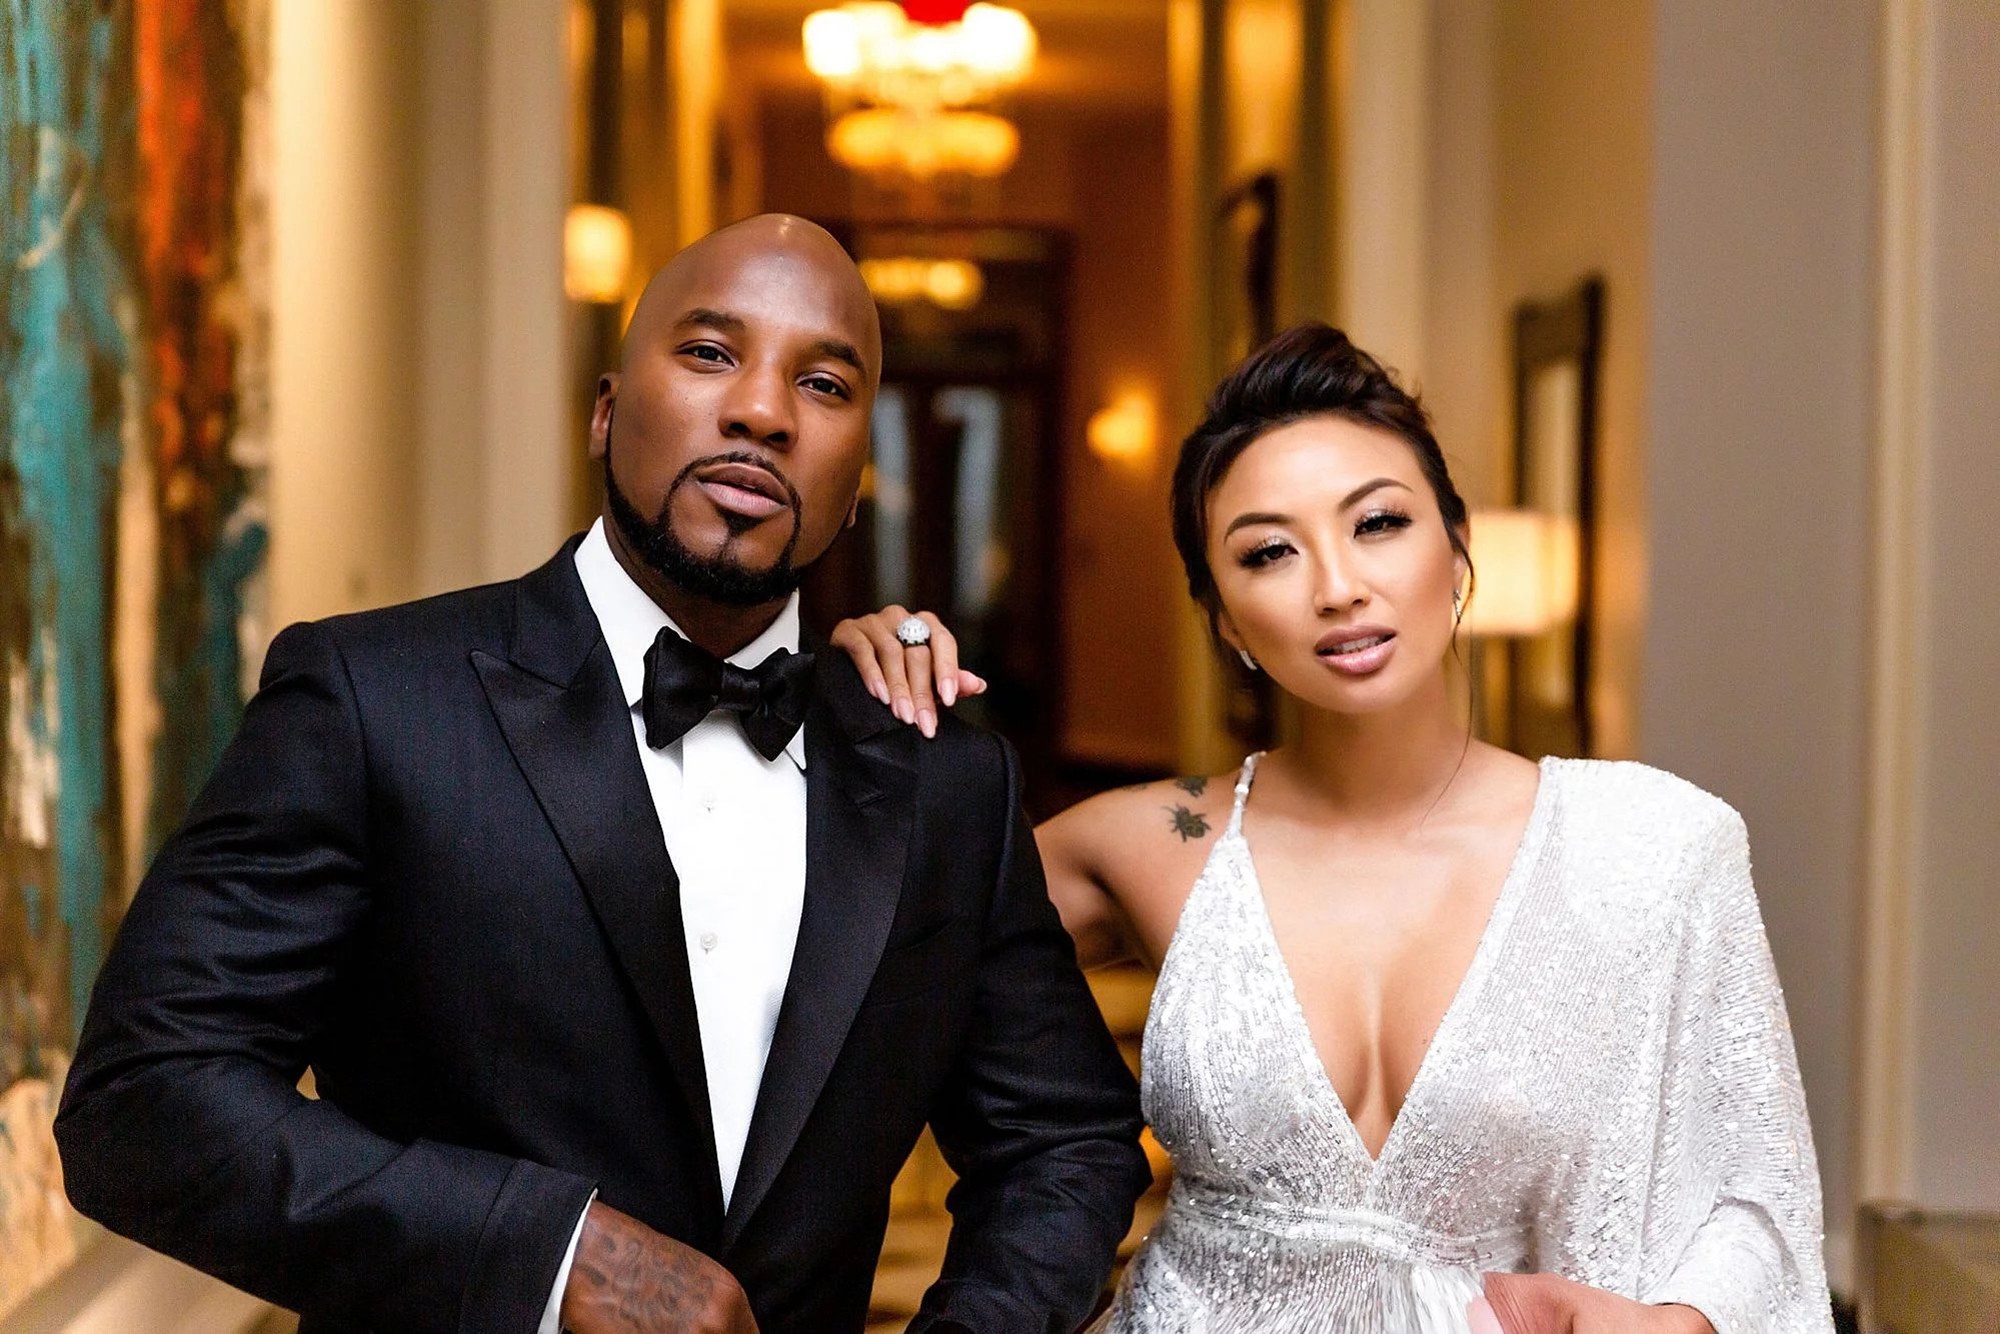 Jeannie Mai’s ex-hubby calls her trash in response to her pregnancy with Jeezy